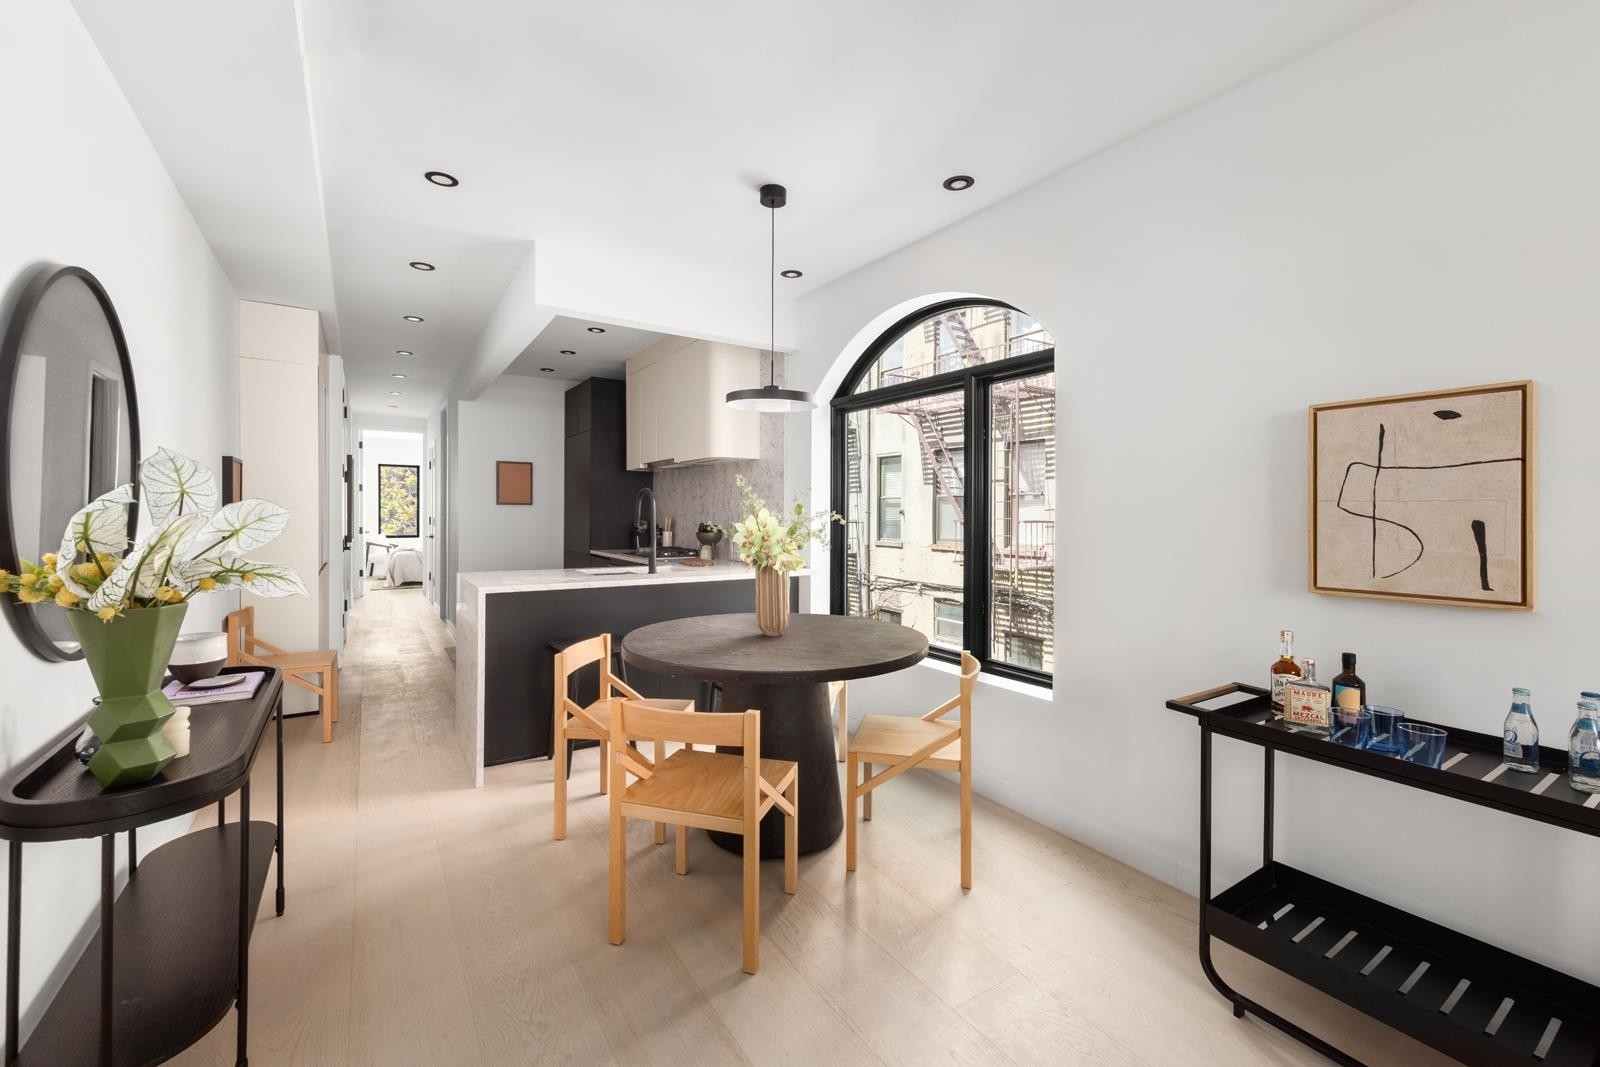 Condominium for Sale at 8 WINDSOR PL, 2 Park Slope, Brooklyn, NY 11215